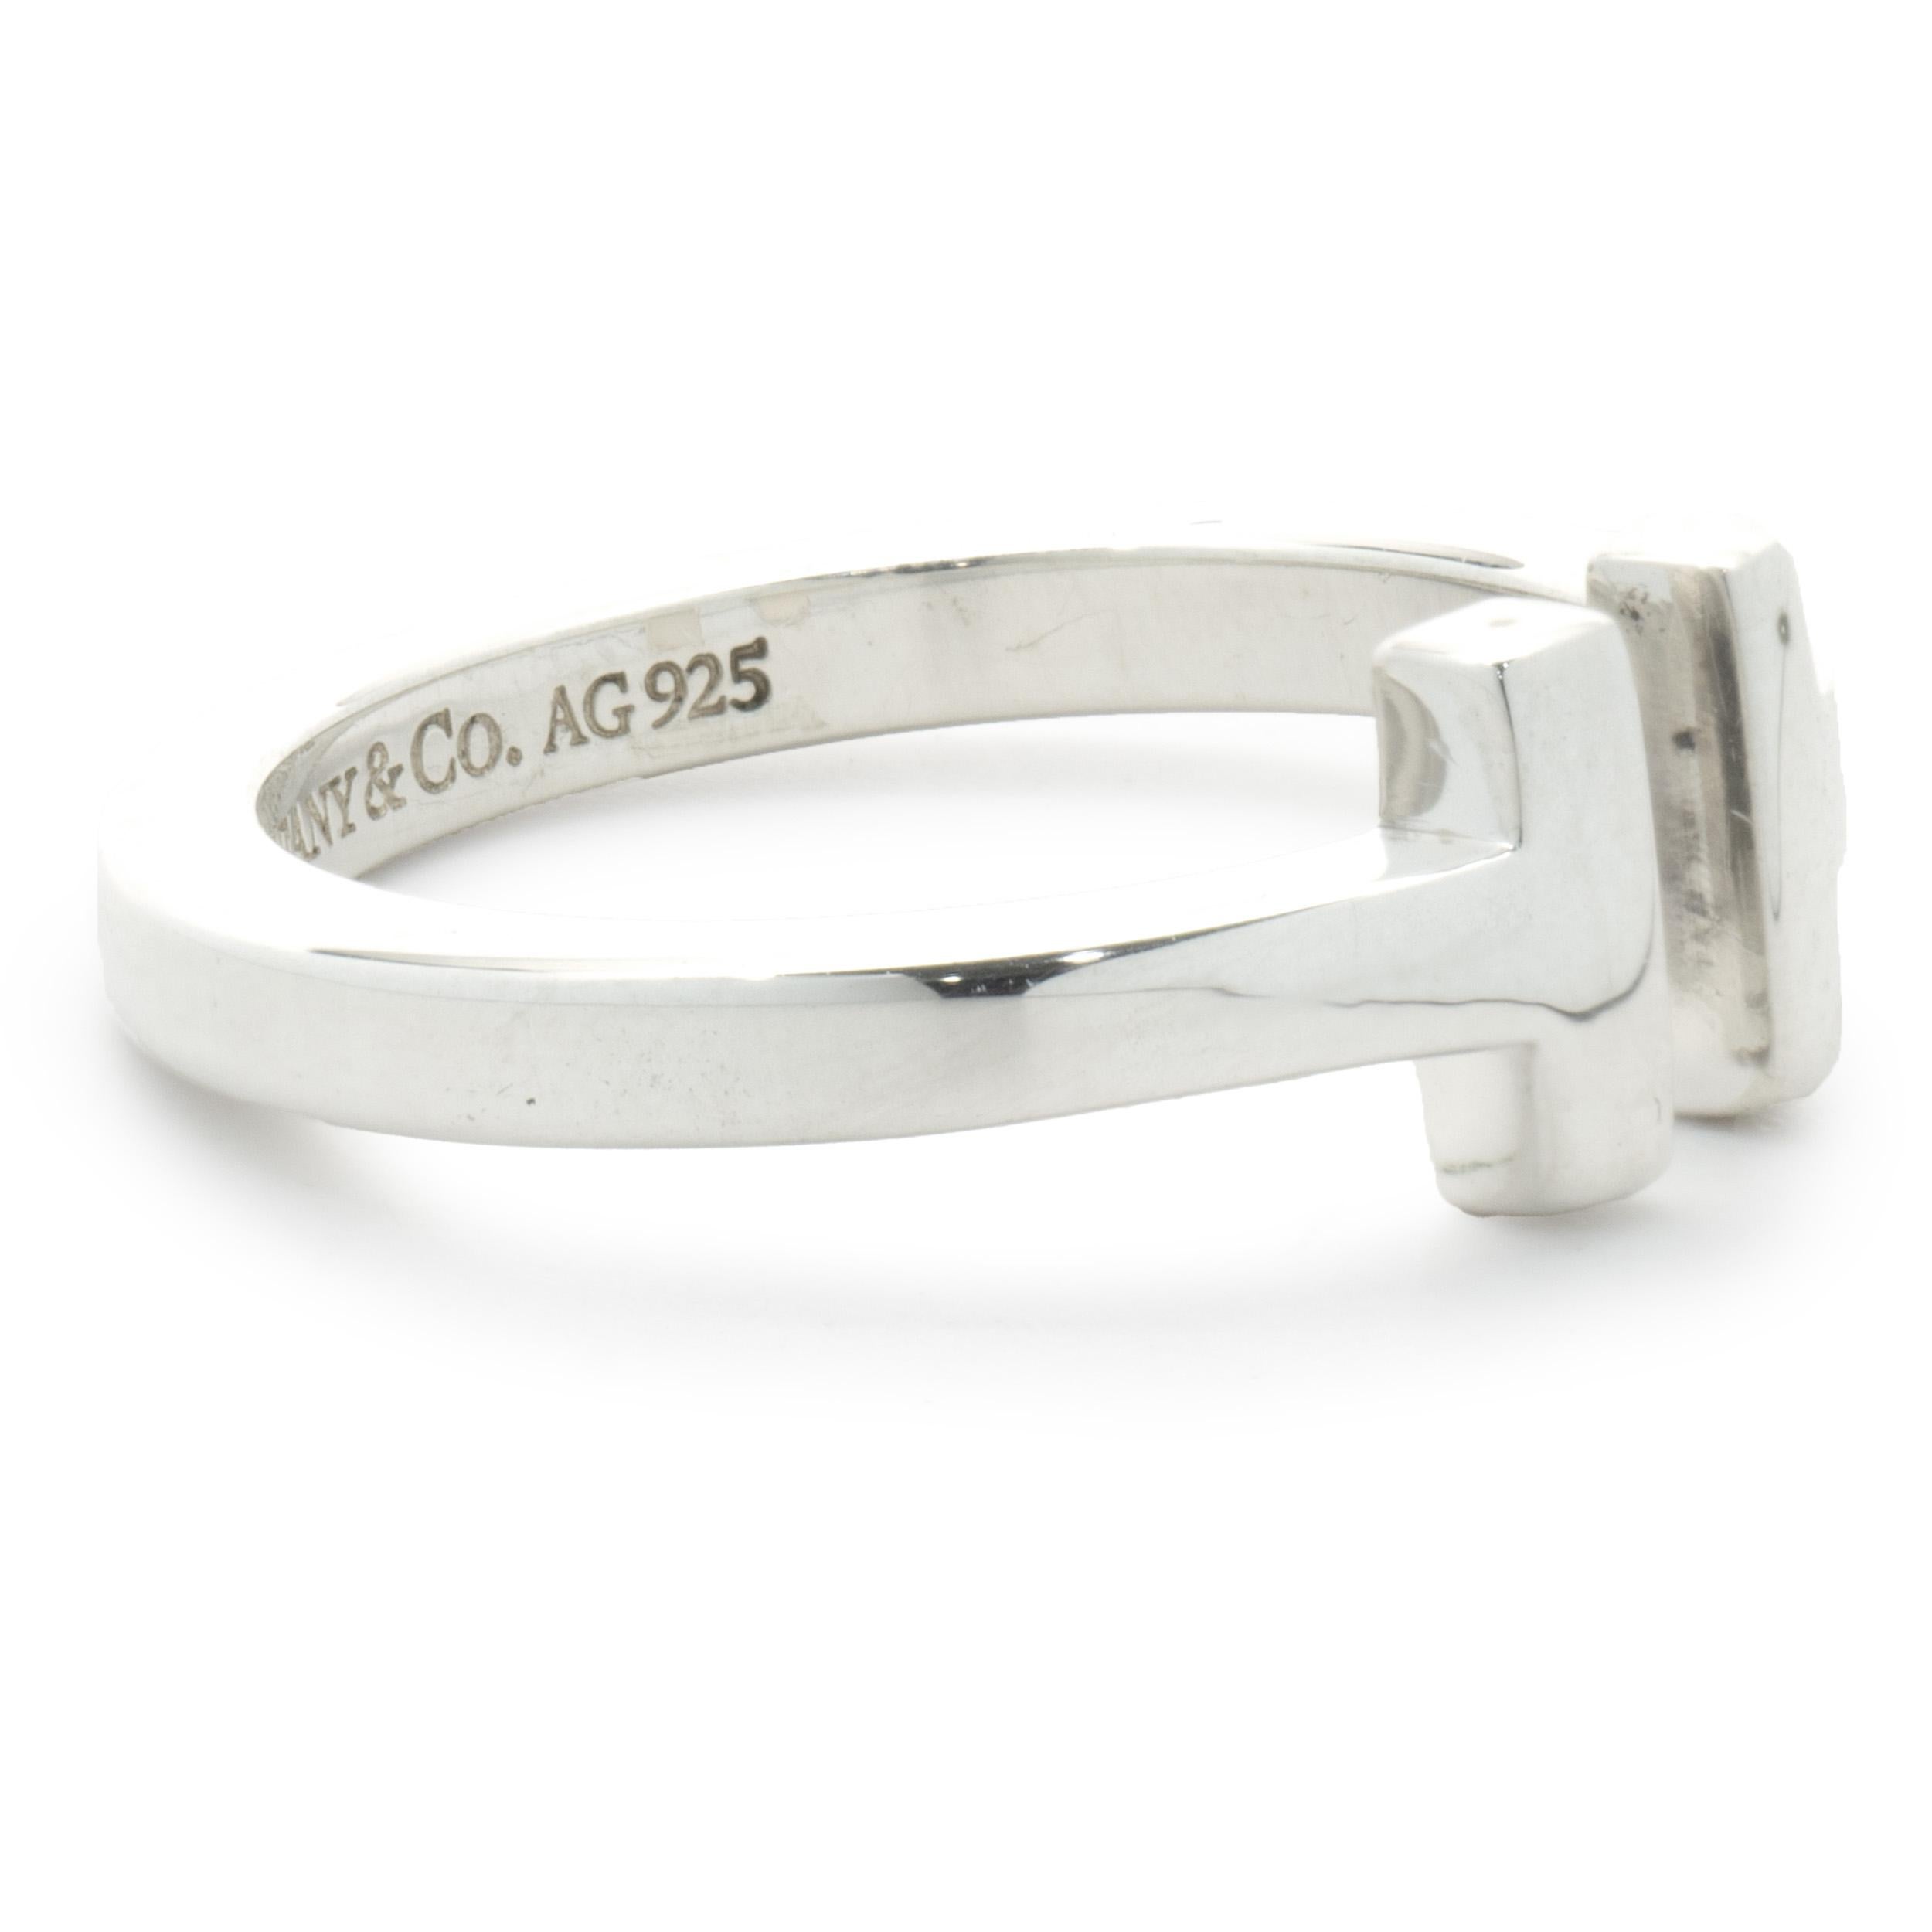 Designer: Tiffany & Co. 
Material: sterling silver
Dimensions: ring top measures 7.7mm
Size: 9
Weight: 4.91 grams